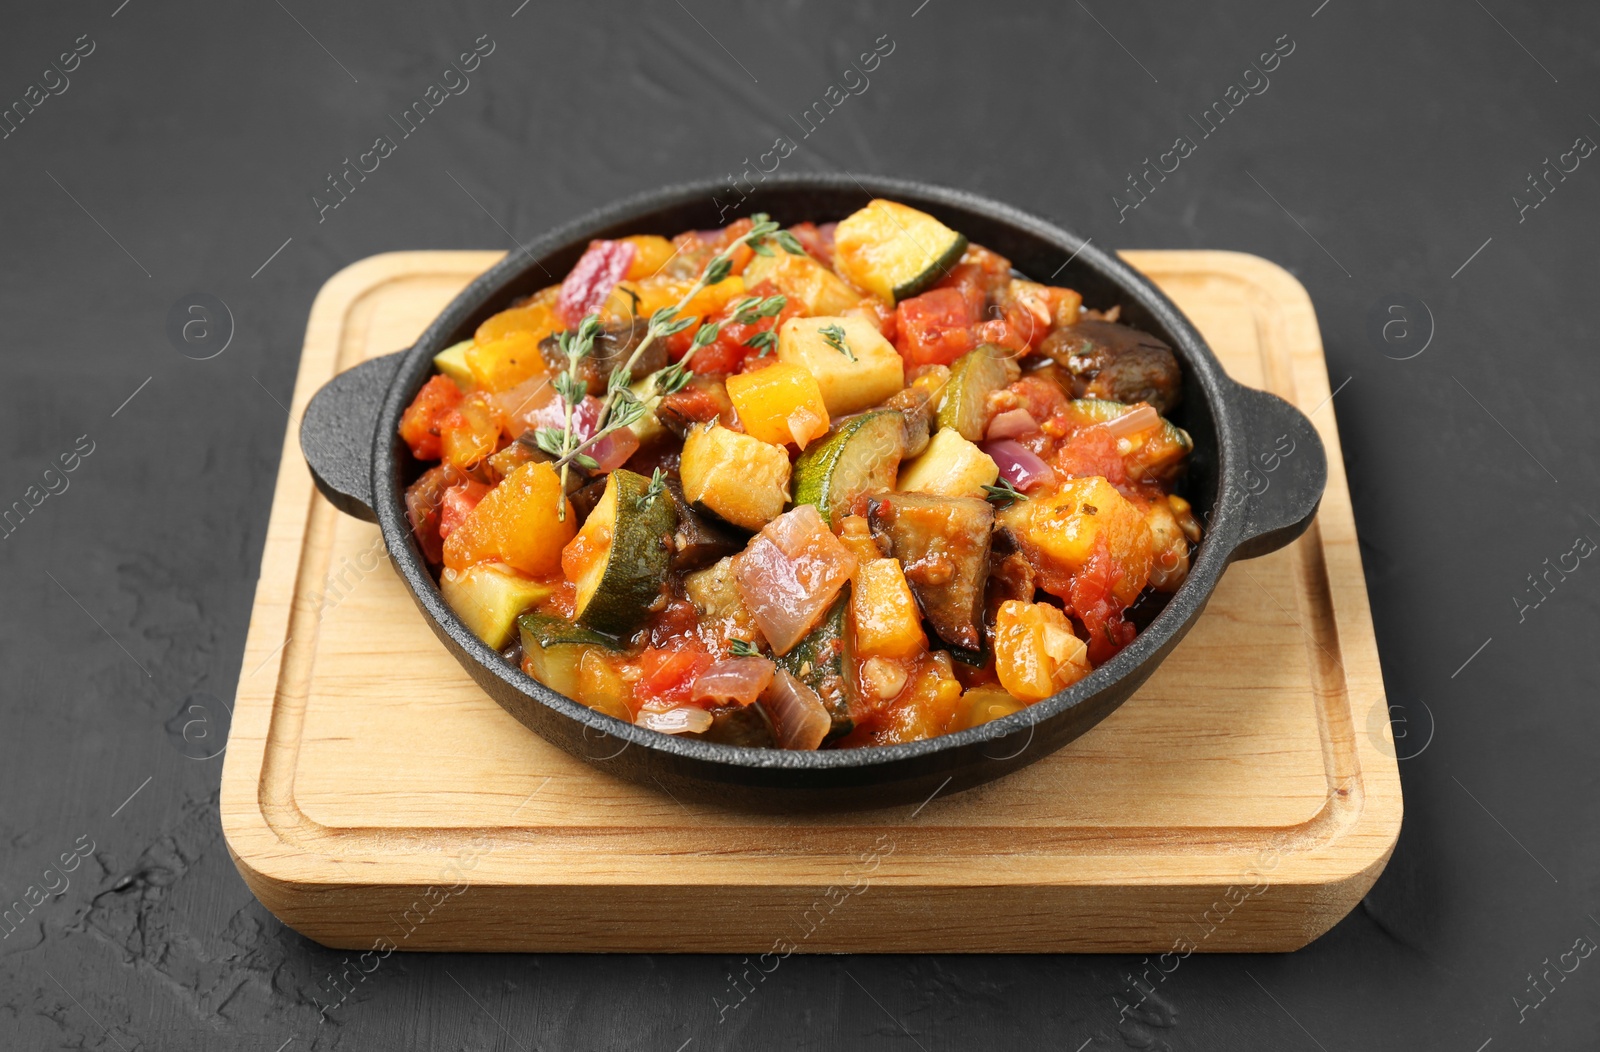 Photo of Dish with tasty ratatouille on black table